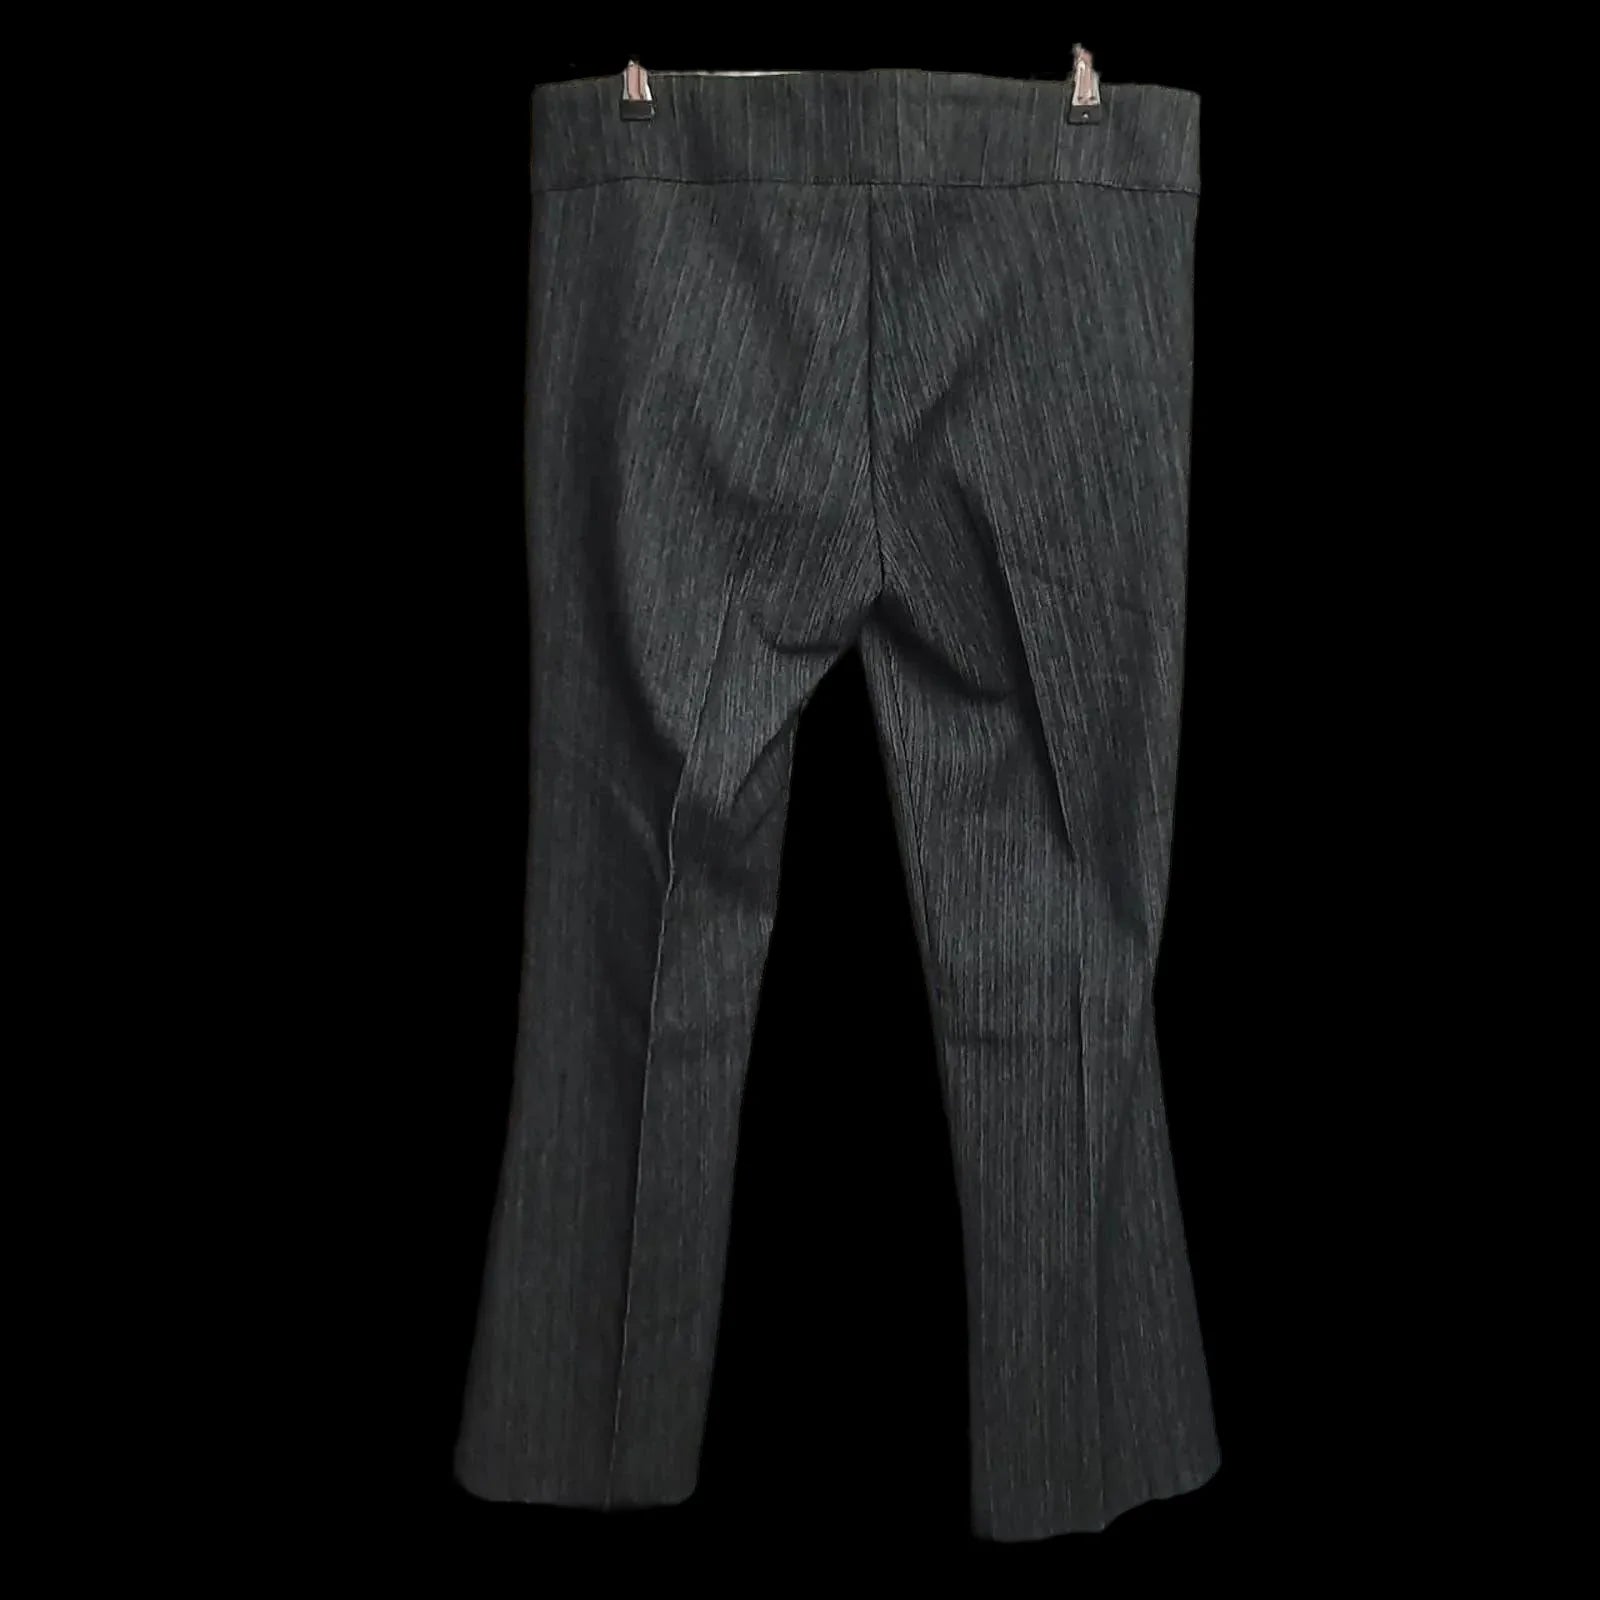 Womens New Look Grey Trousers Uk 14 - 2 - 355